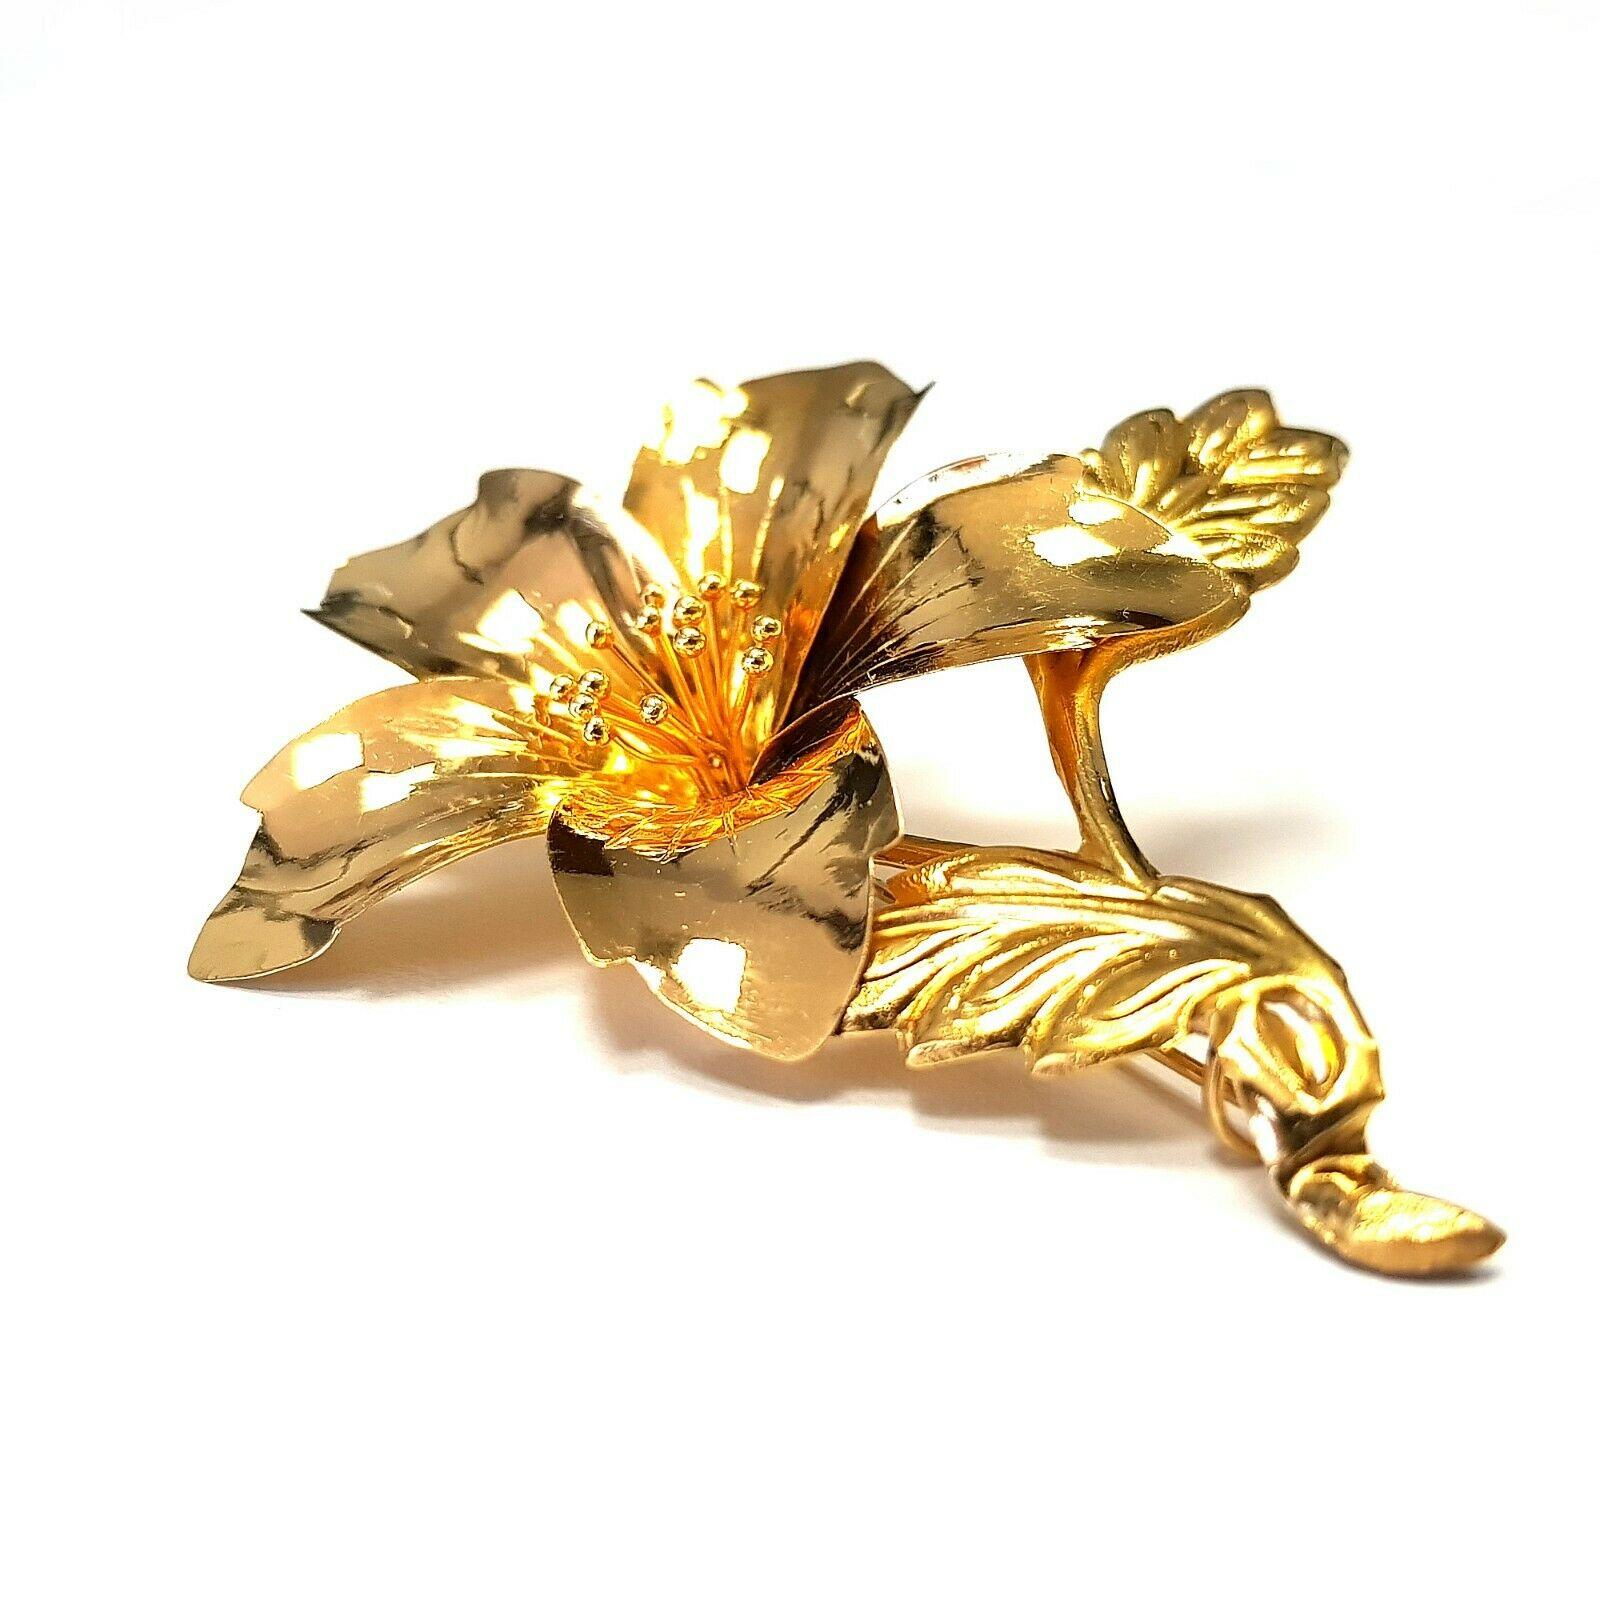  VINTAGE 20K Yellow Gold  Flower Pin Brooch 
Specifications:
    type: FLOWER PIN BROOCH
    metal: yellow gold
    purity: 20k
    LENGTH: 2.5